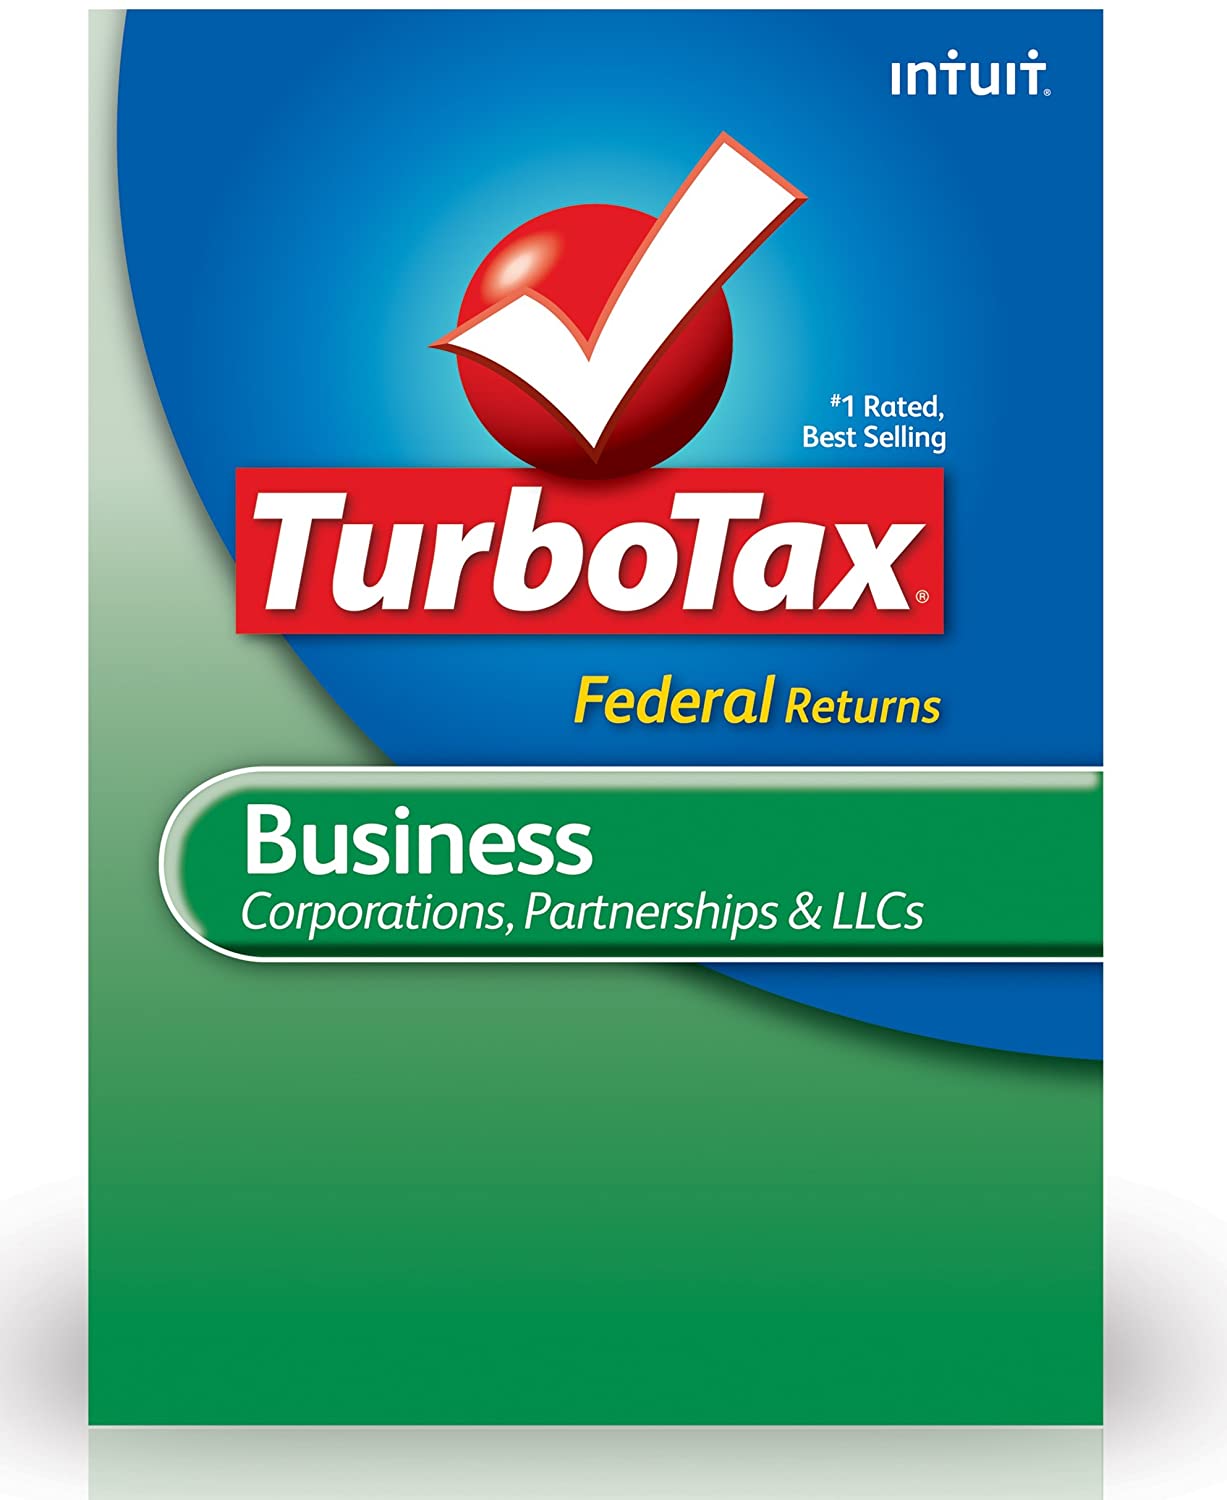 turbotax products 2016 for business